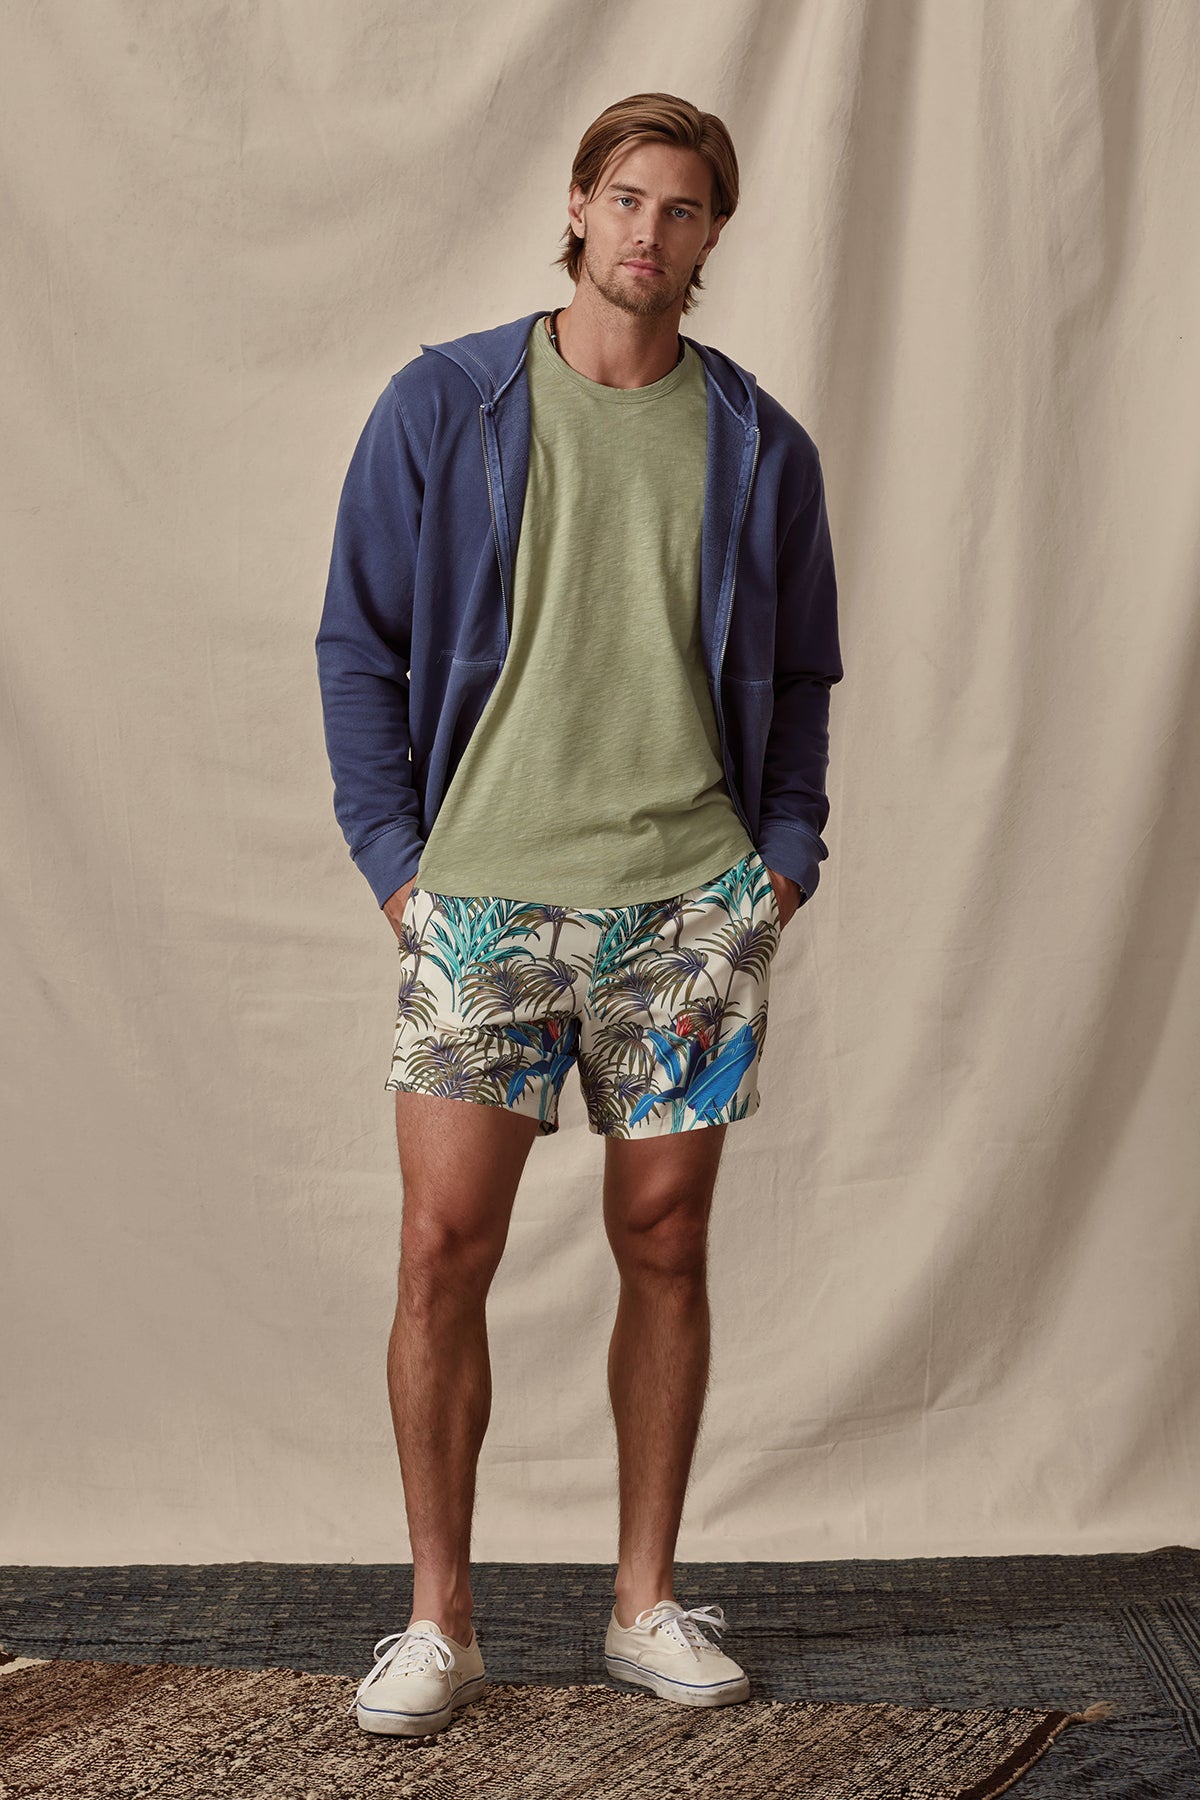   Man standing in a casual pose wearing a navy zip-up hoodie, green crew neck Velvet by Graham & Spencer t-shirt, tropical print shorts, and white sneakers, against a beige backdrop. 